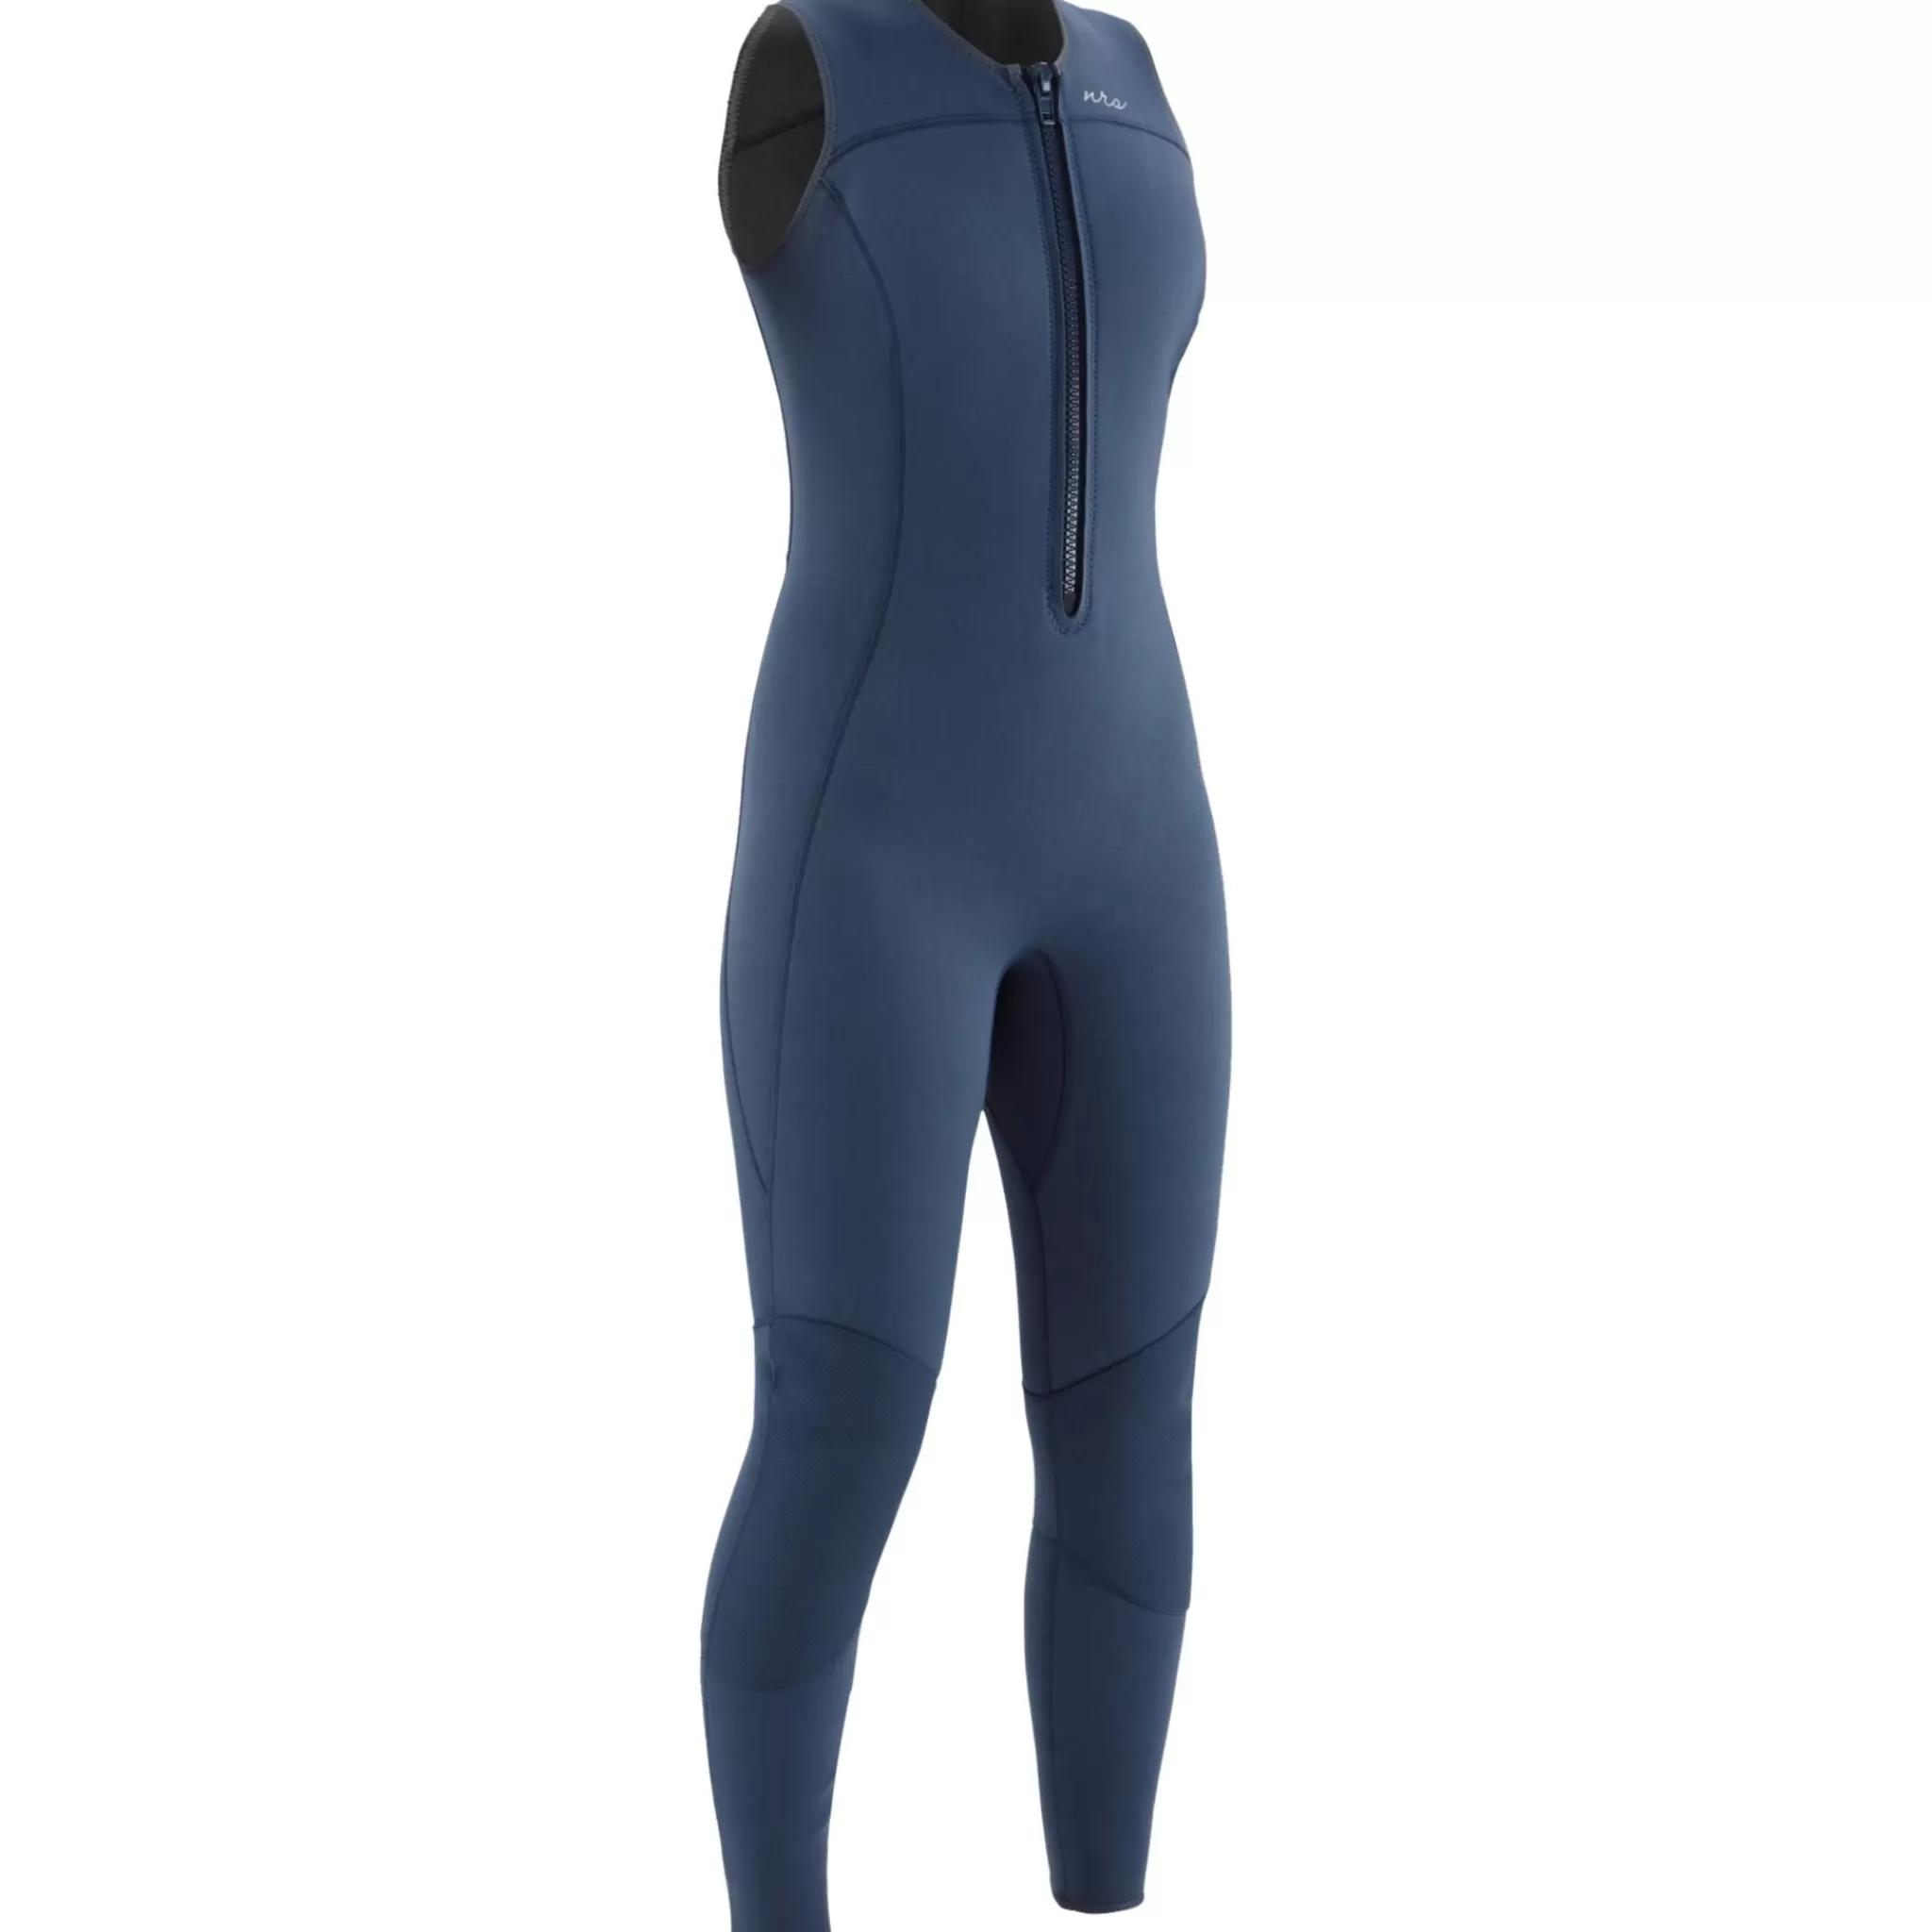 Discount NRS W'S 3.0 Ignitor Wetsuit, Vatdrakt Dame